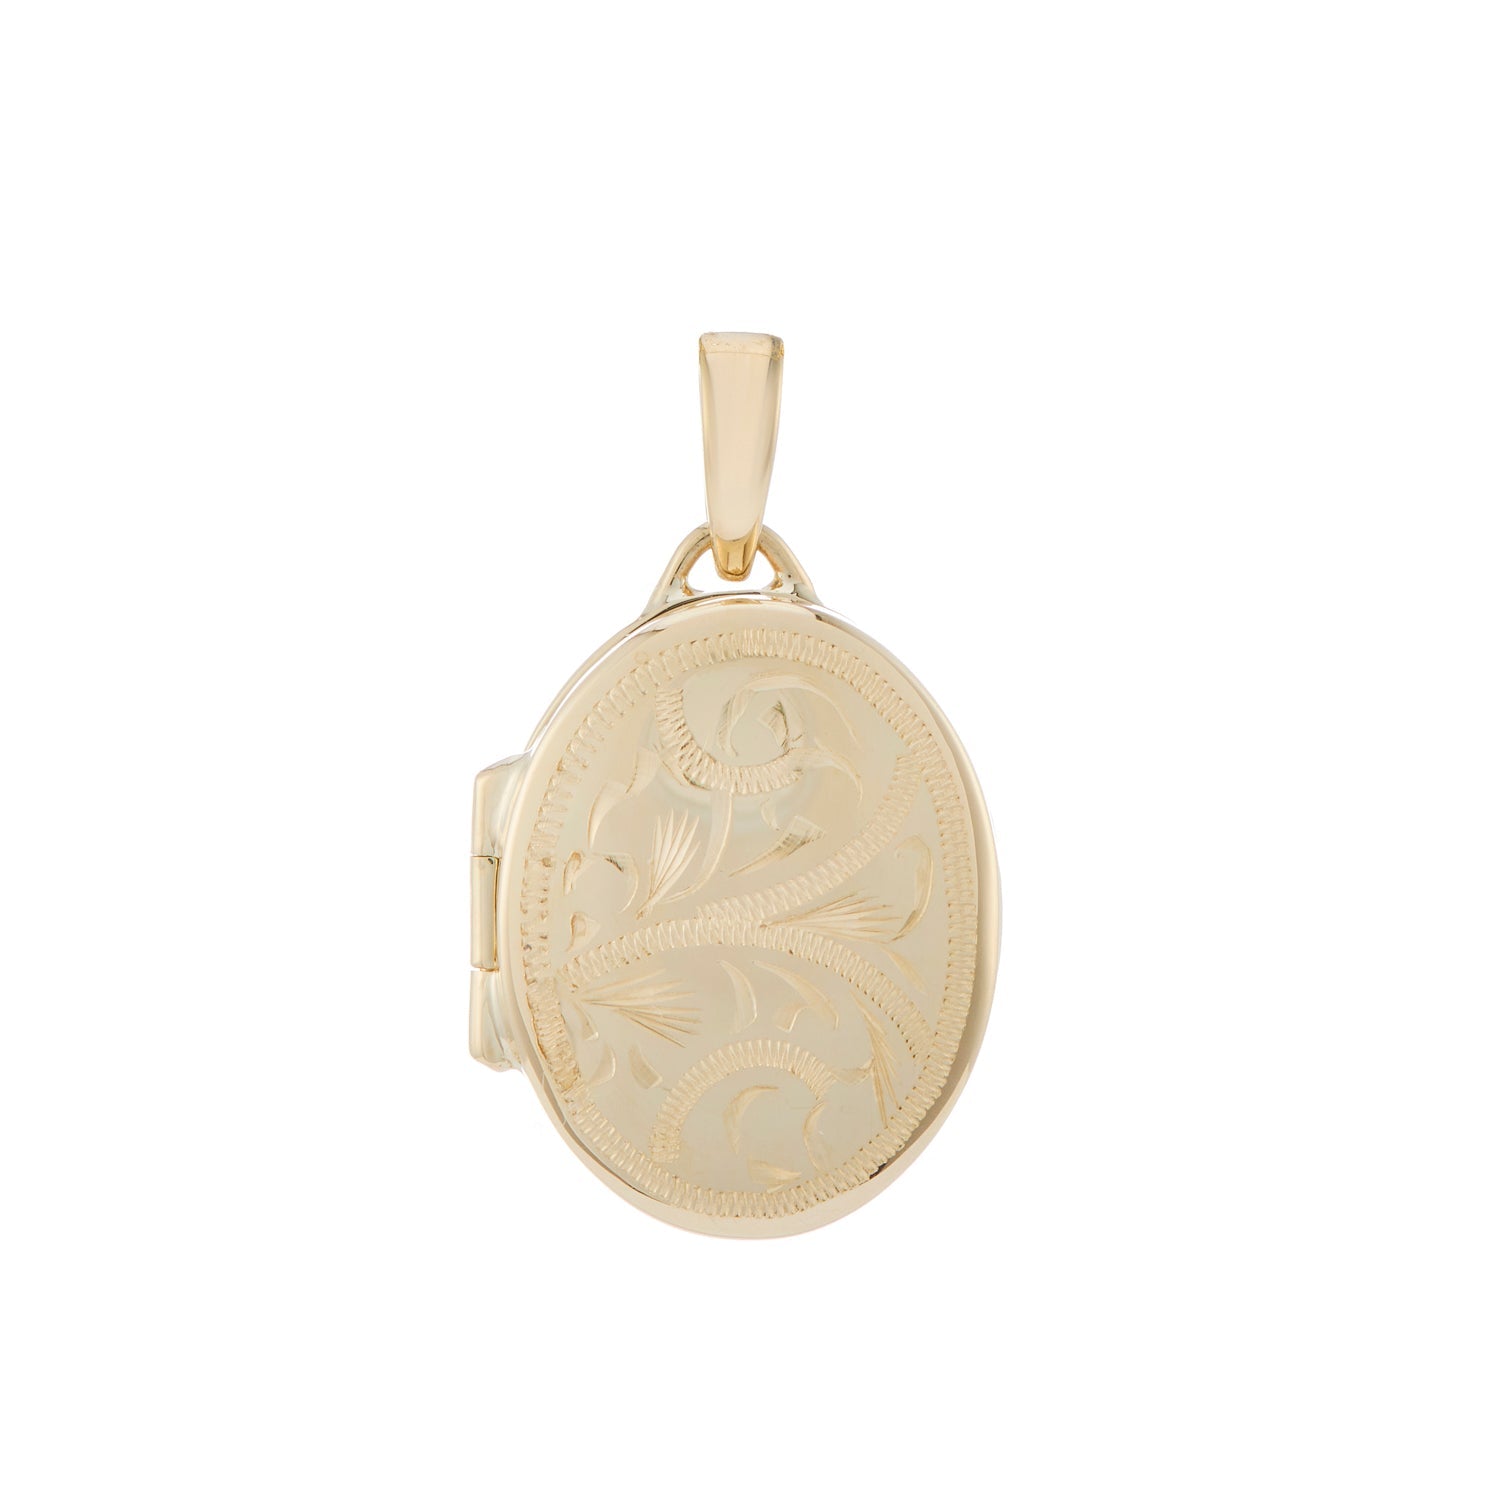 9ct gold full engraved 13mm x 17mm oval locket